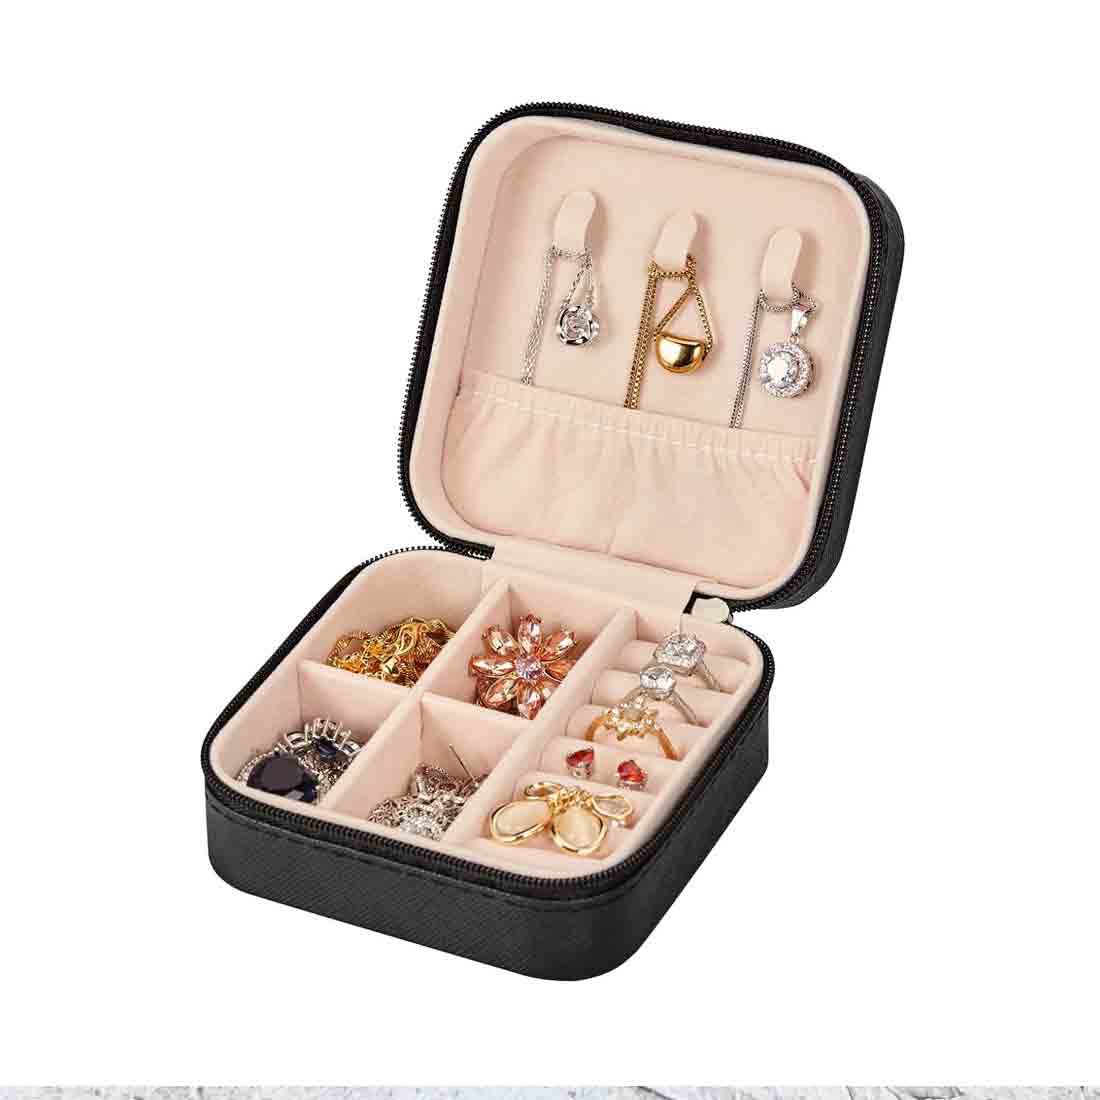 Personalized Jewellery Organiser for Travel jewelry Case for Earrings - Add Name